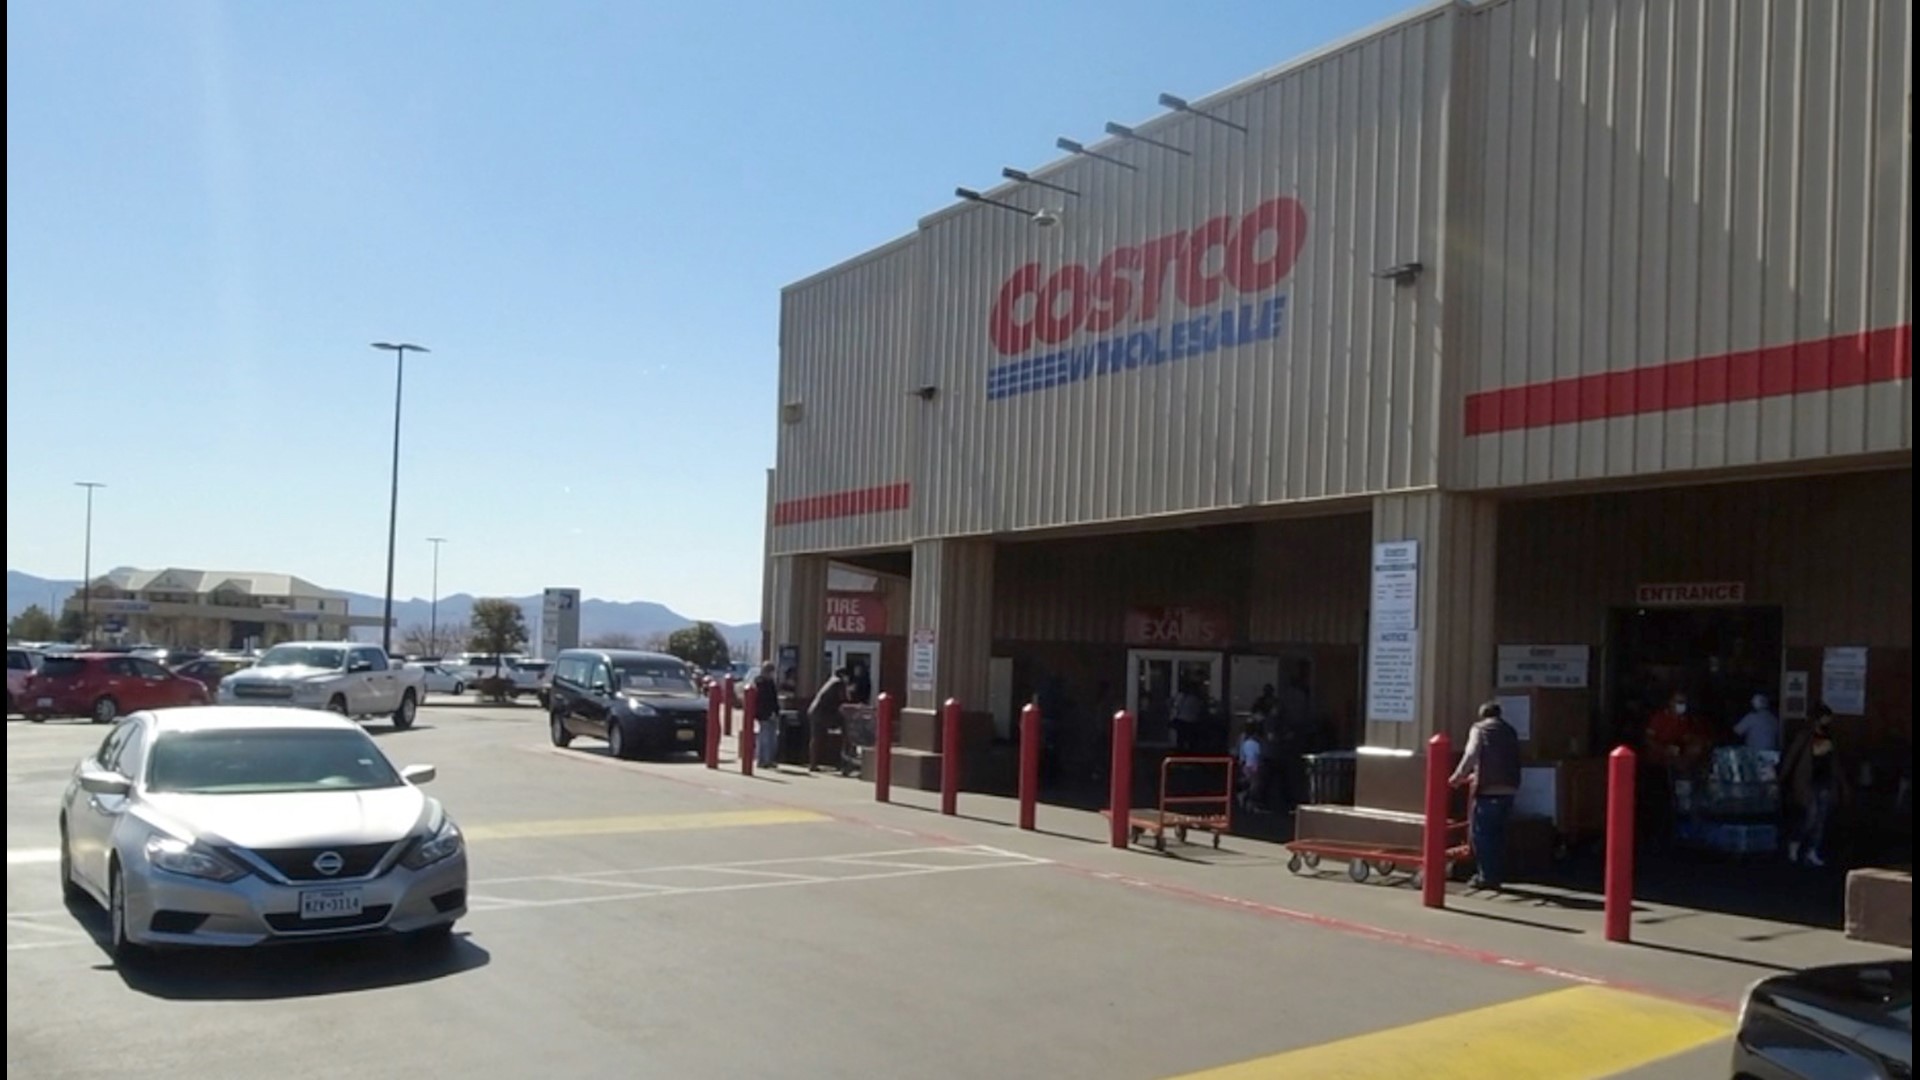 Costco is warning customers of a toilet paper shortage due to order delays. Veuer's Maria Mercedes Galuppo has the story.